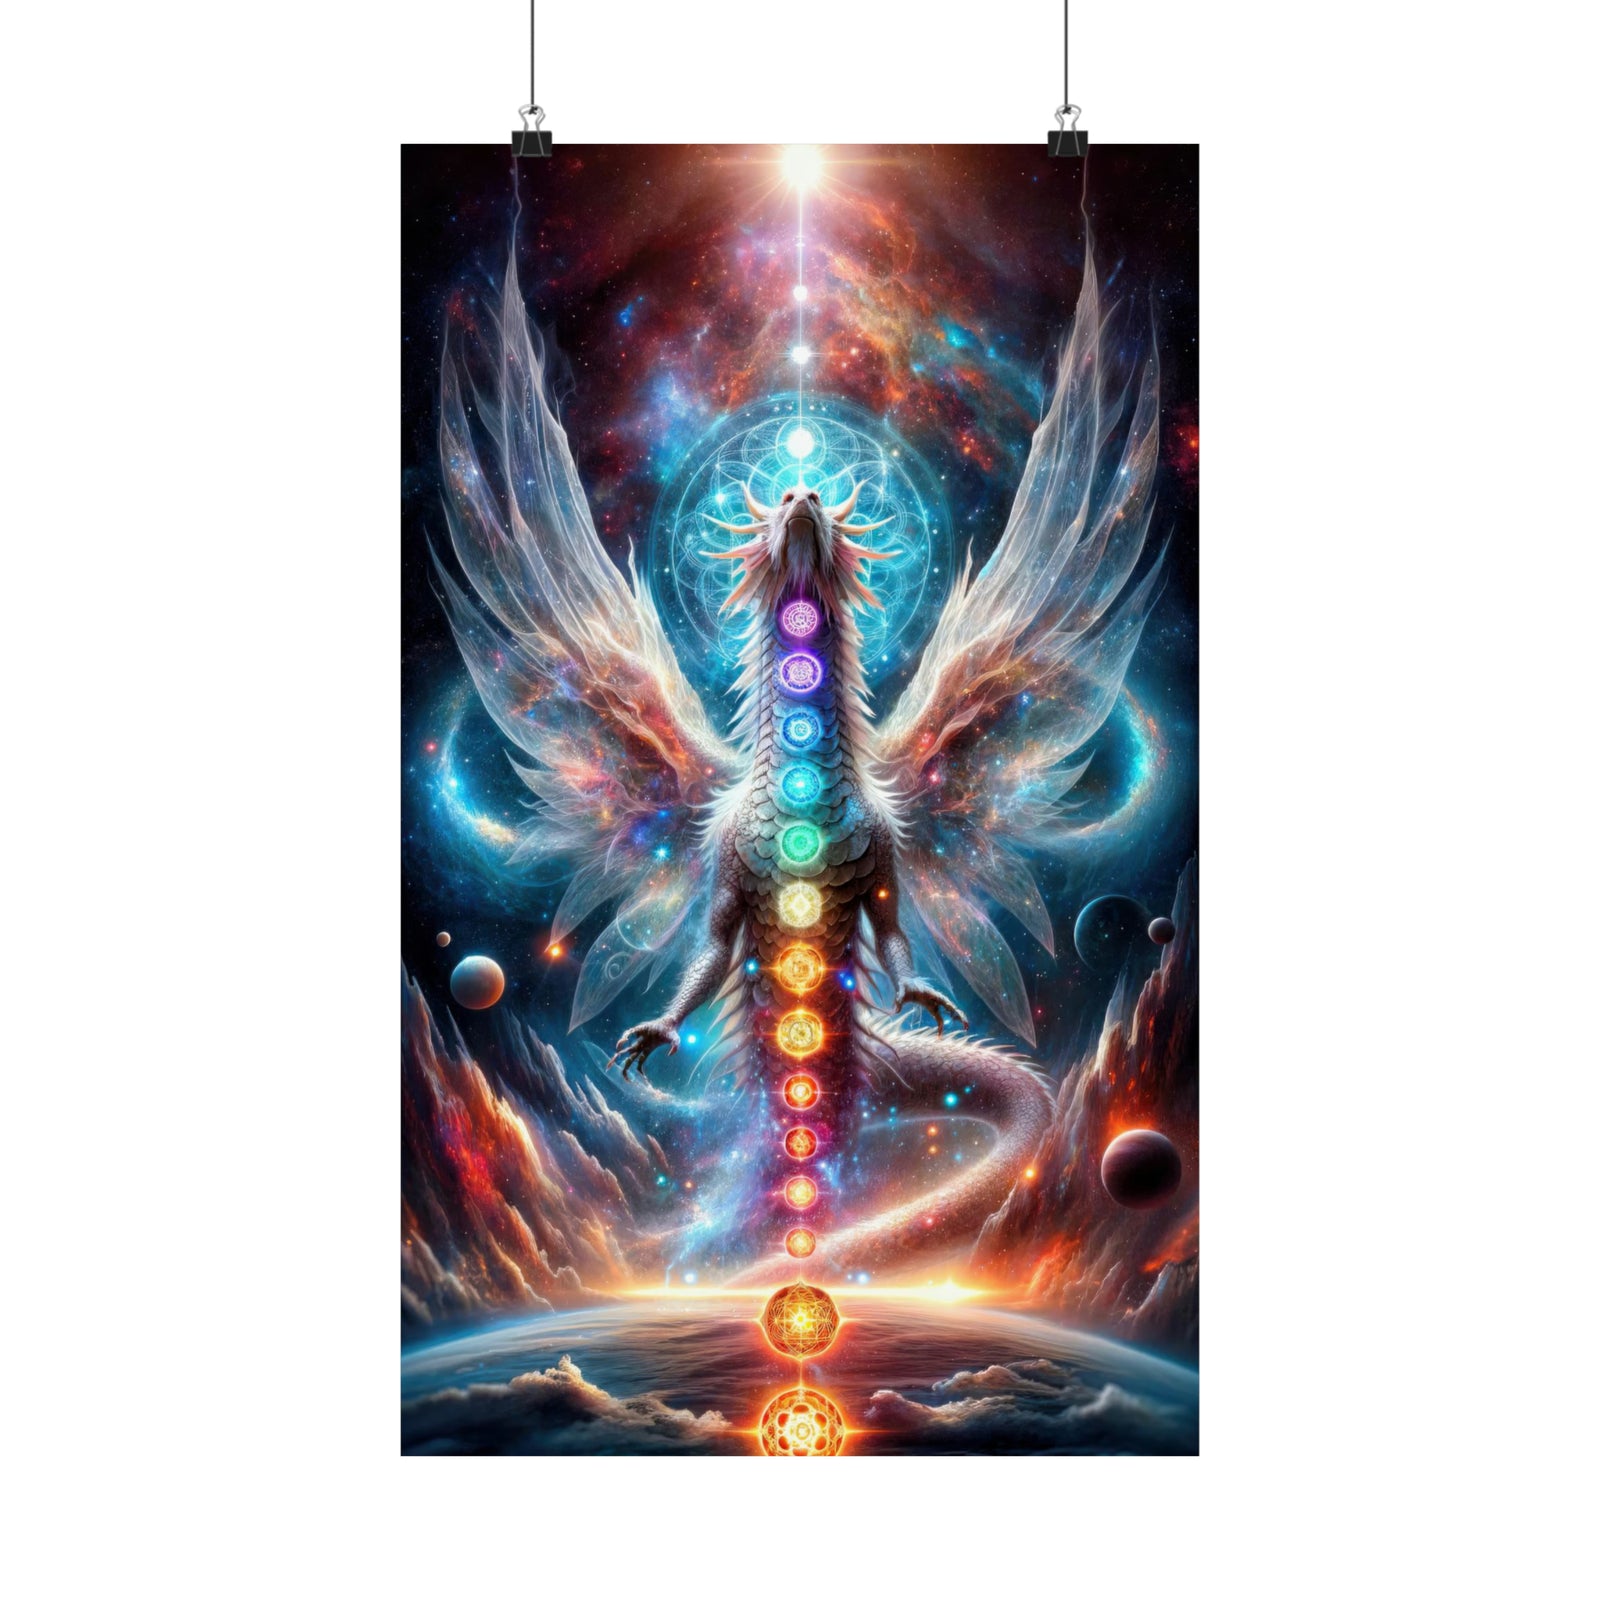 The Ascension of the Cosmic Serpent Poster